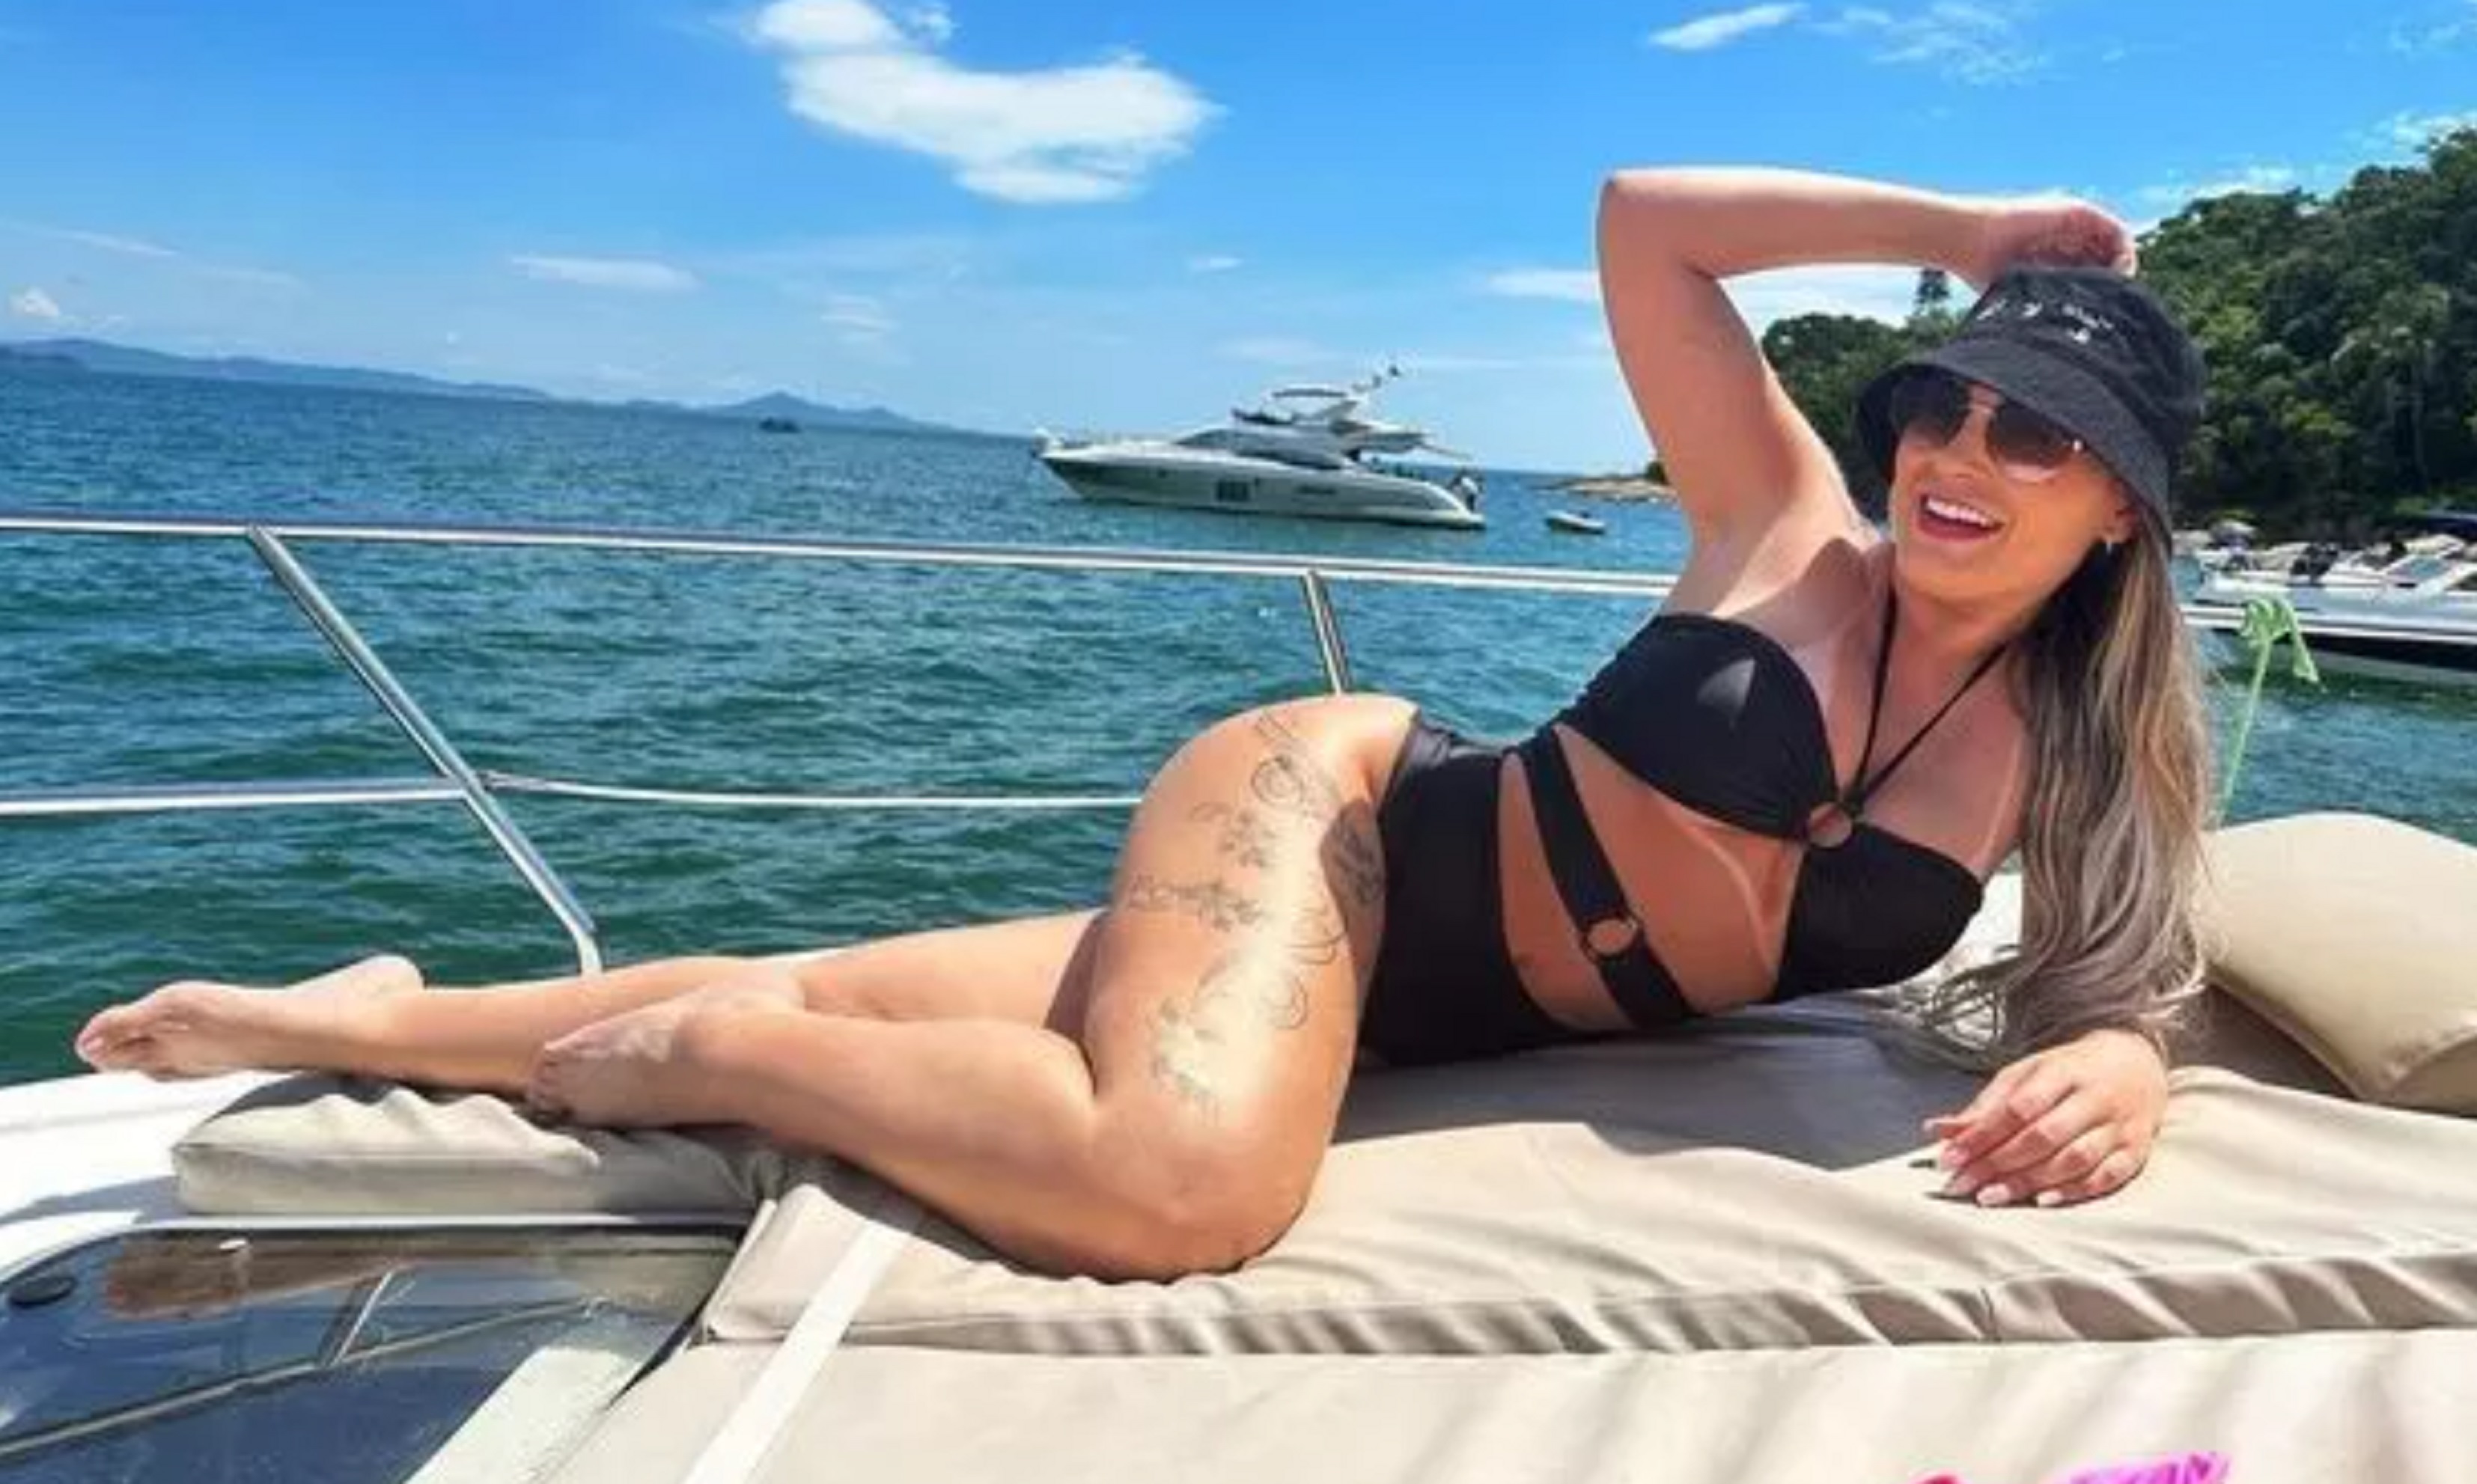 Andressa Porn - Son of OnlyFans star Andressa Urach admits he films her content